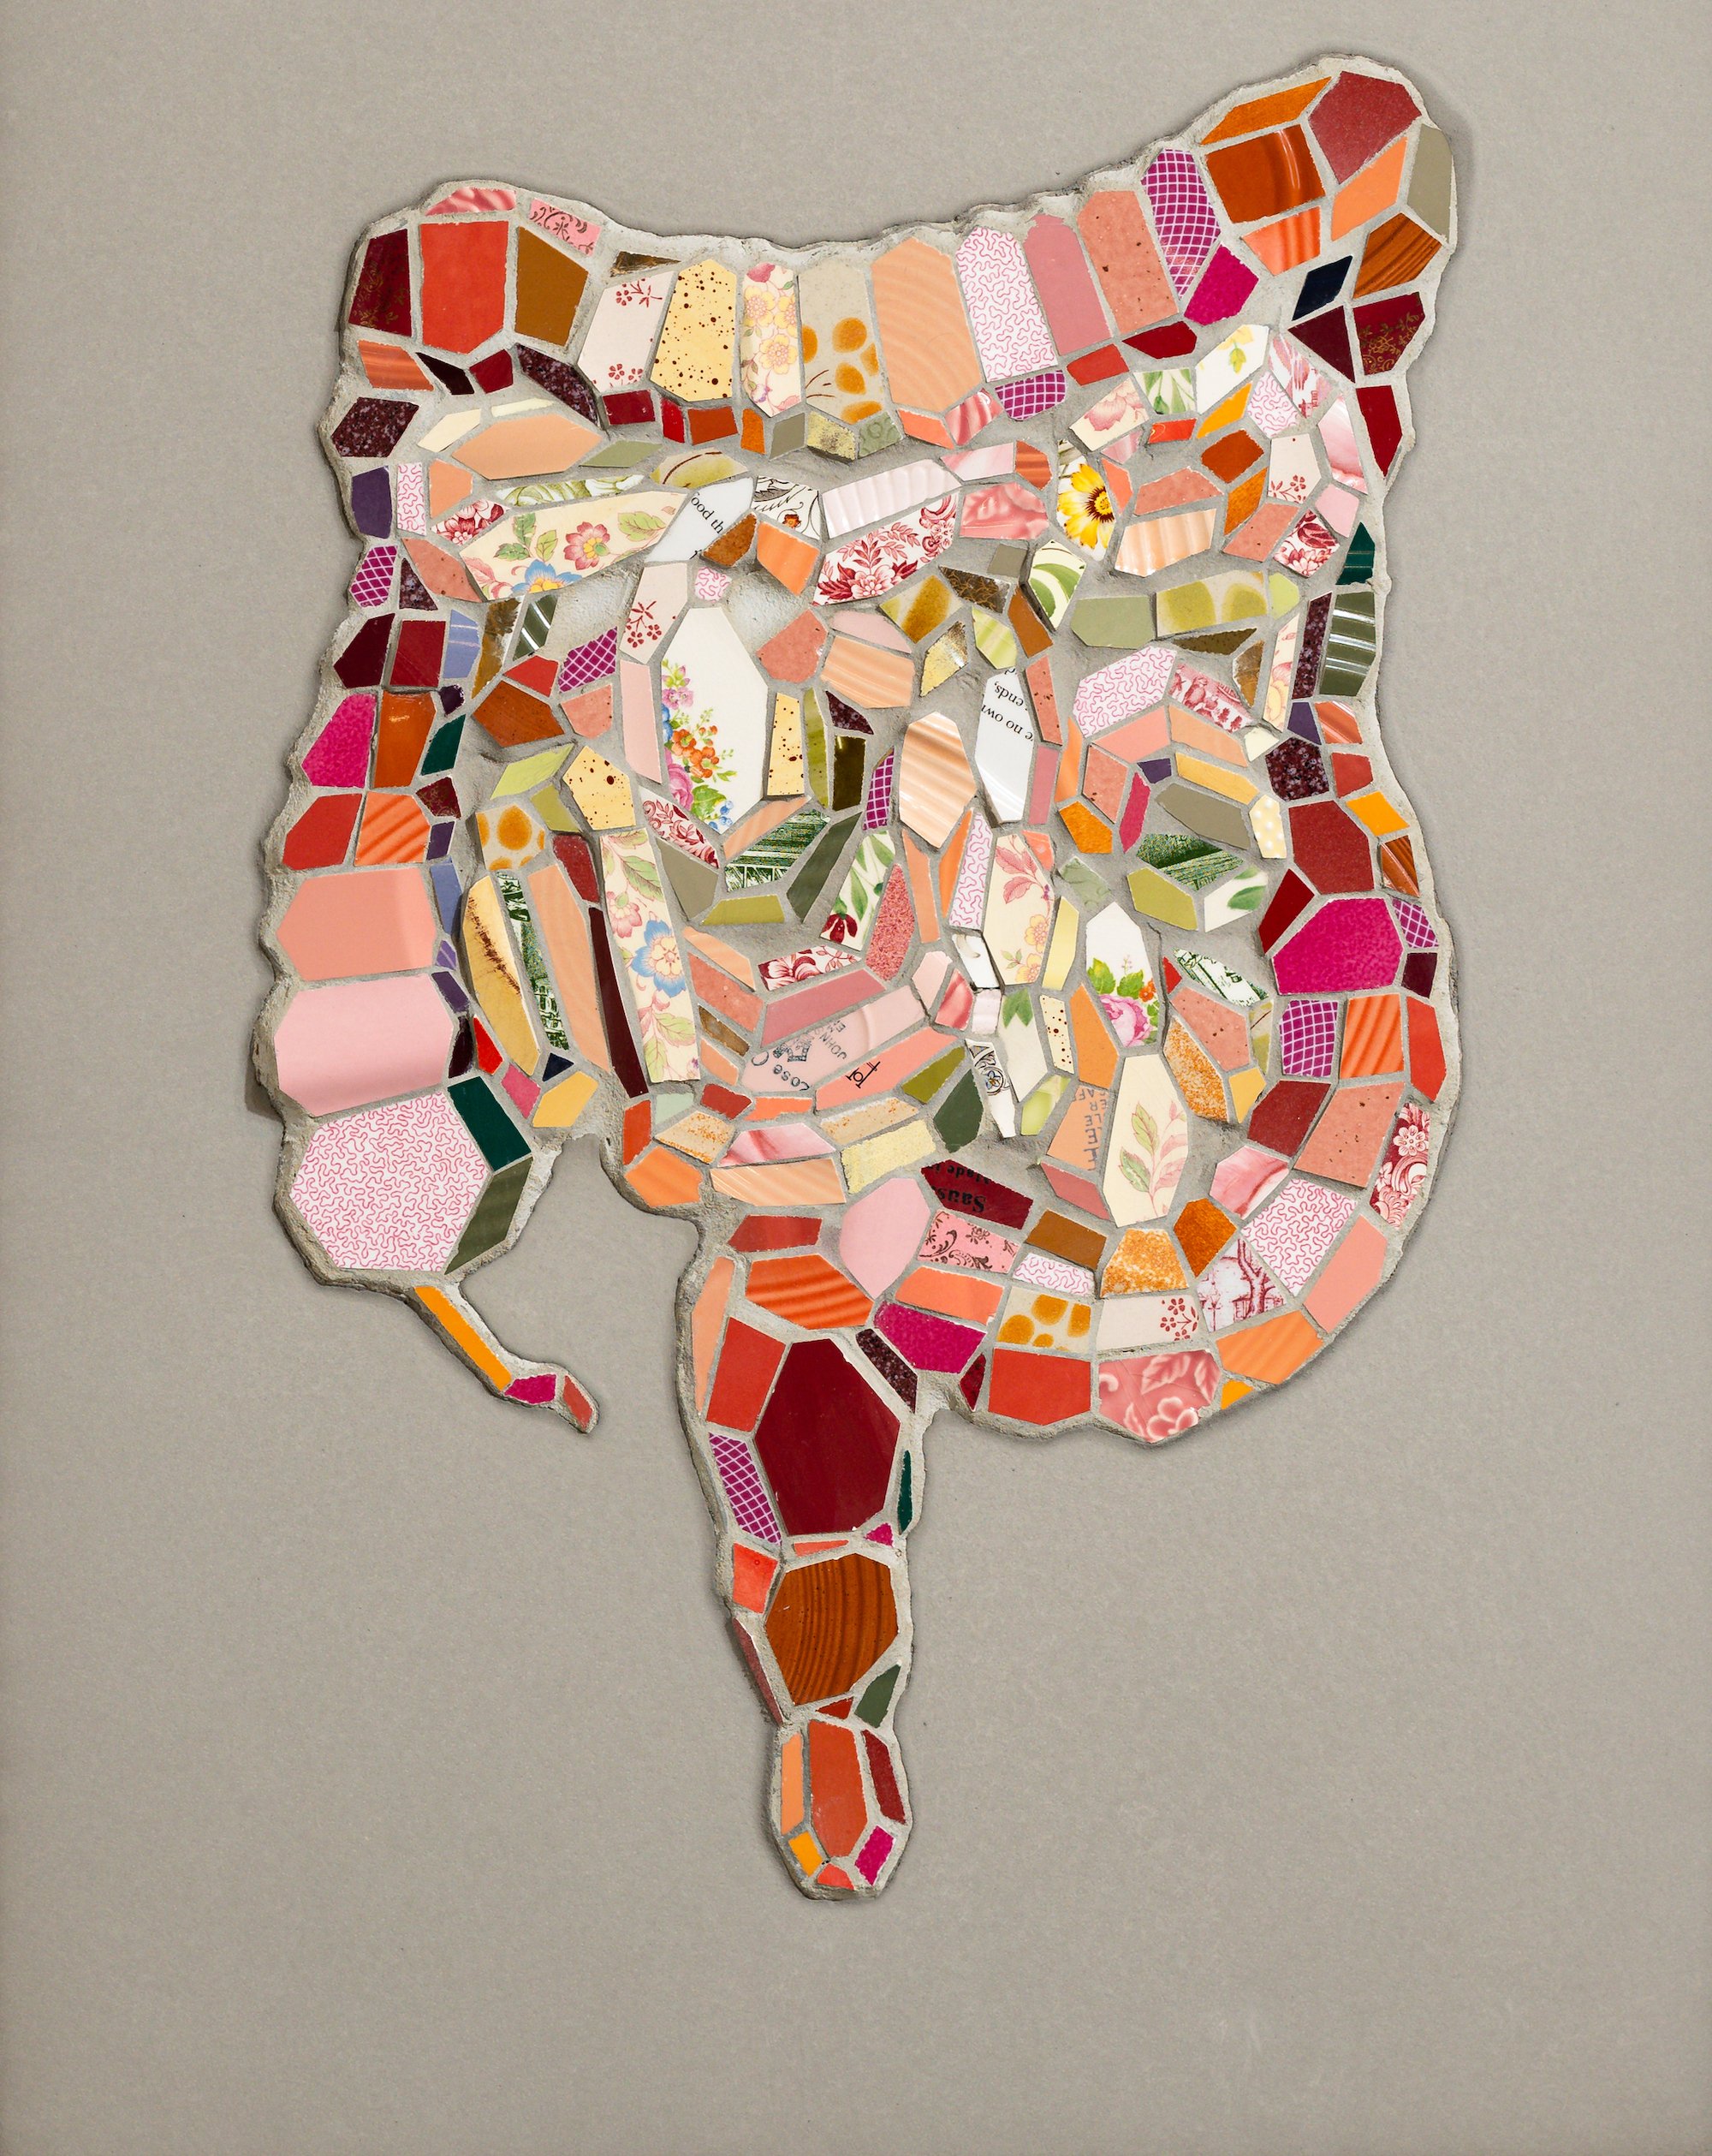 "Relief" Mixed Media Mosaic by Mary Lacy @ Soapbox Arts Gallery, Burlington, Vermont